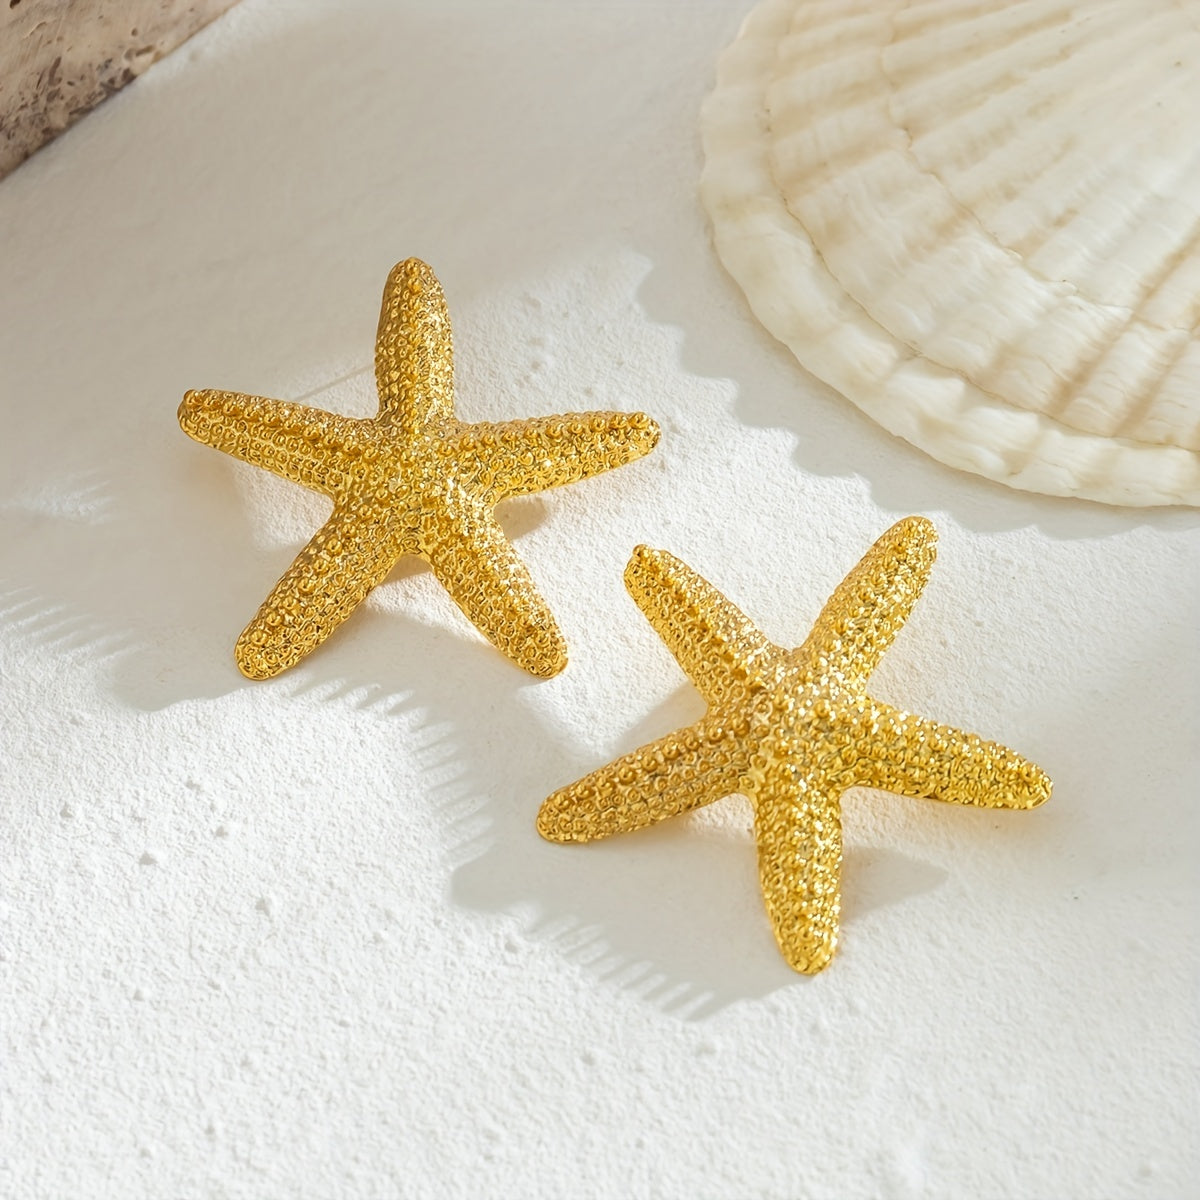 Starfish Stud Earring Retro Dramatic Metal Style Personality Fashion Beach Style Summer Daily Jewelry For Women